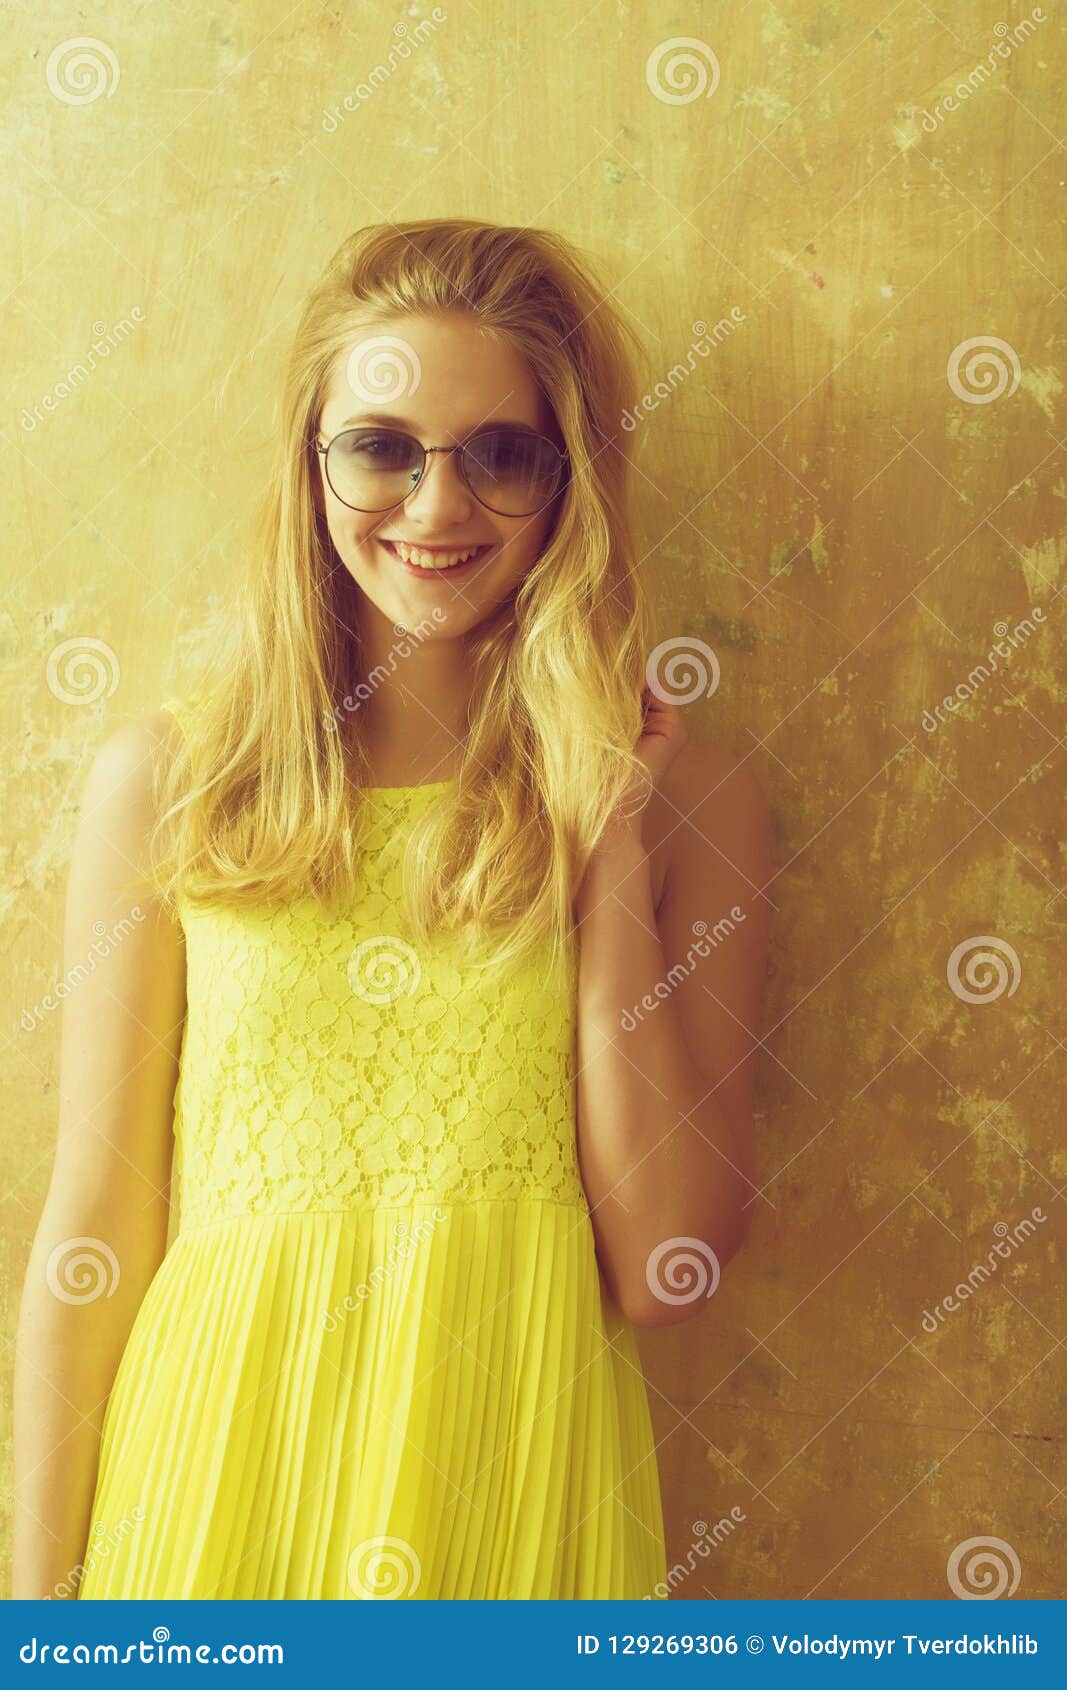 Pretty Happy Girl With Blonde Hair In Yellow Dress Sunglasses